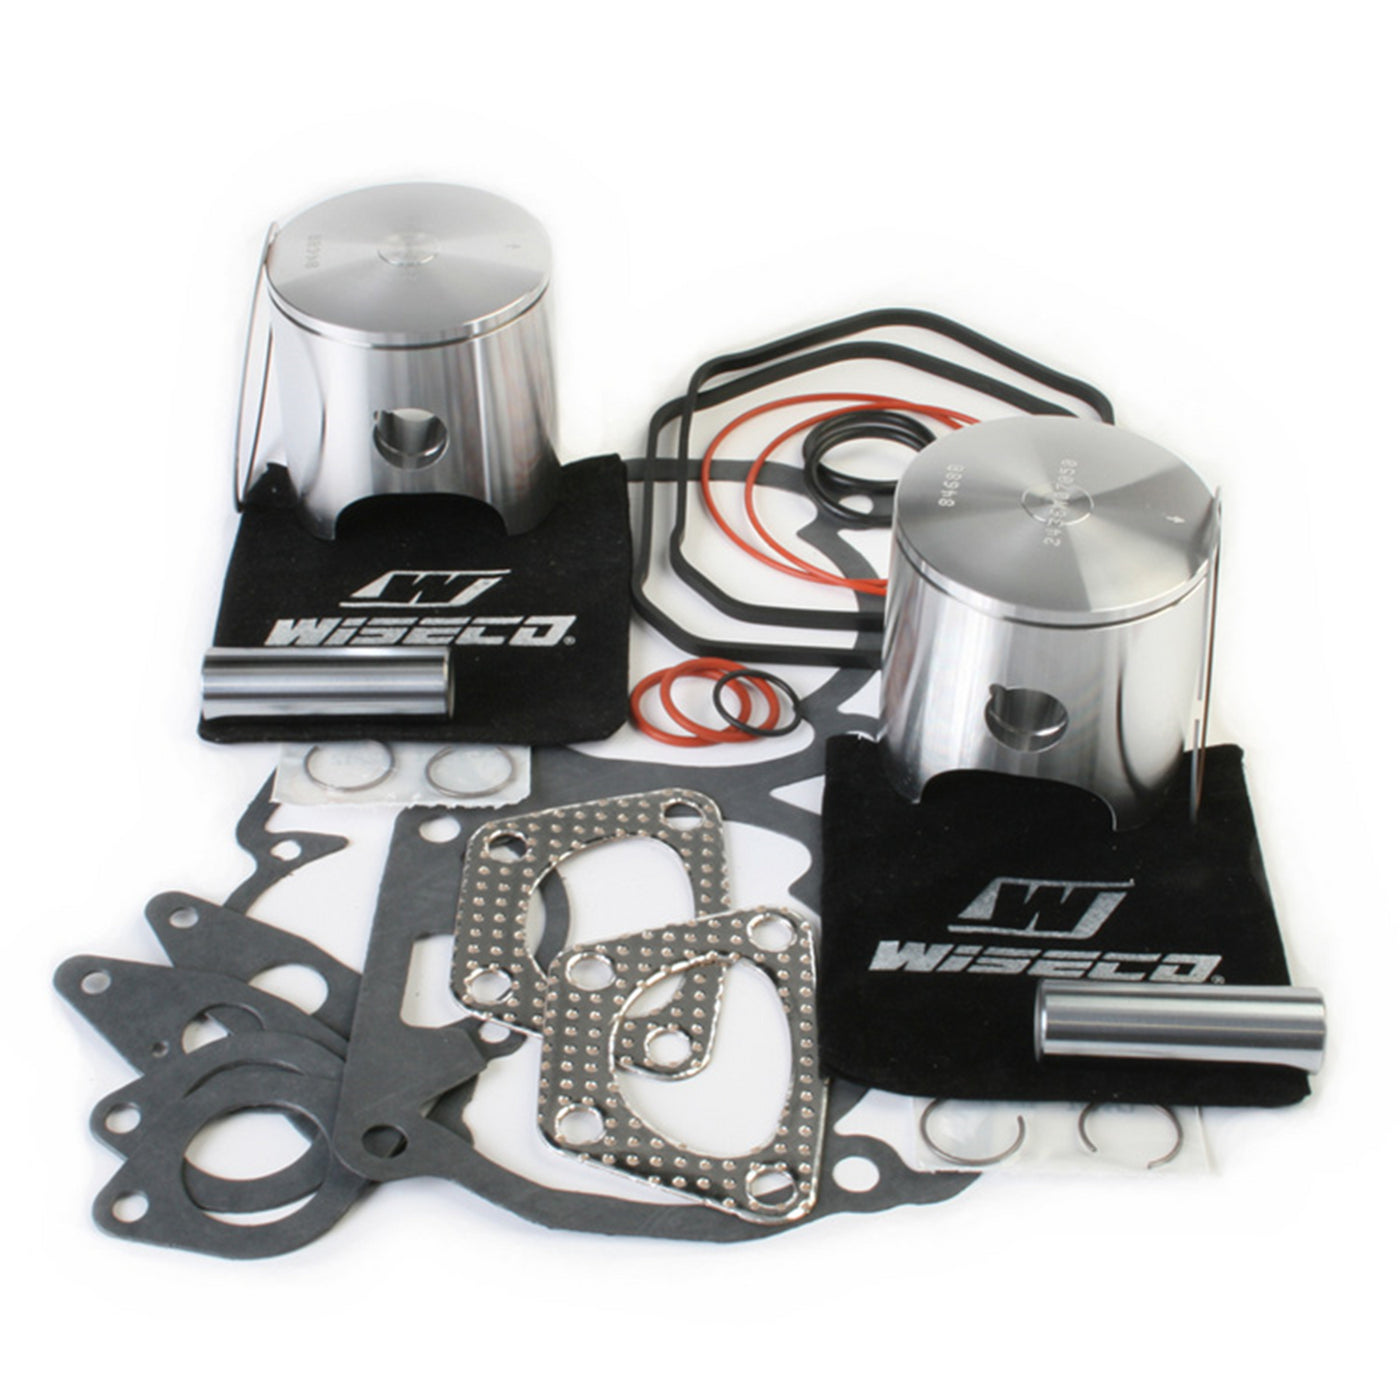 Wiseco SK1324 Snowmobile Piston And Kit #SK1324